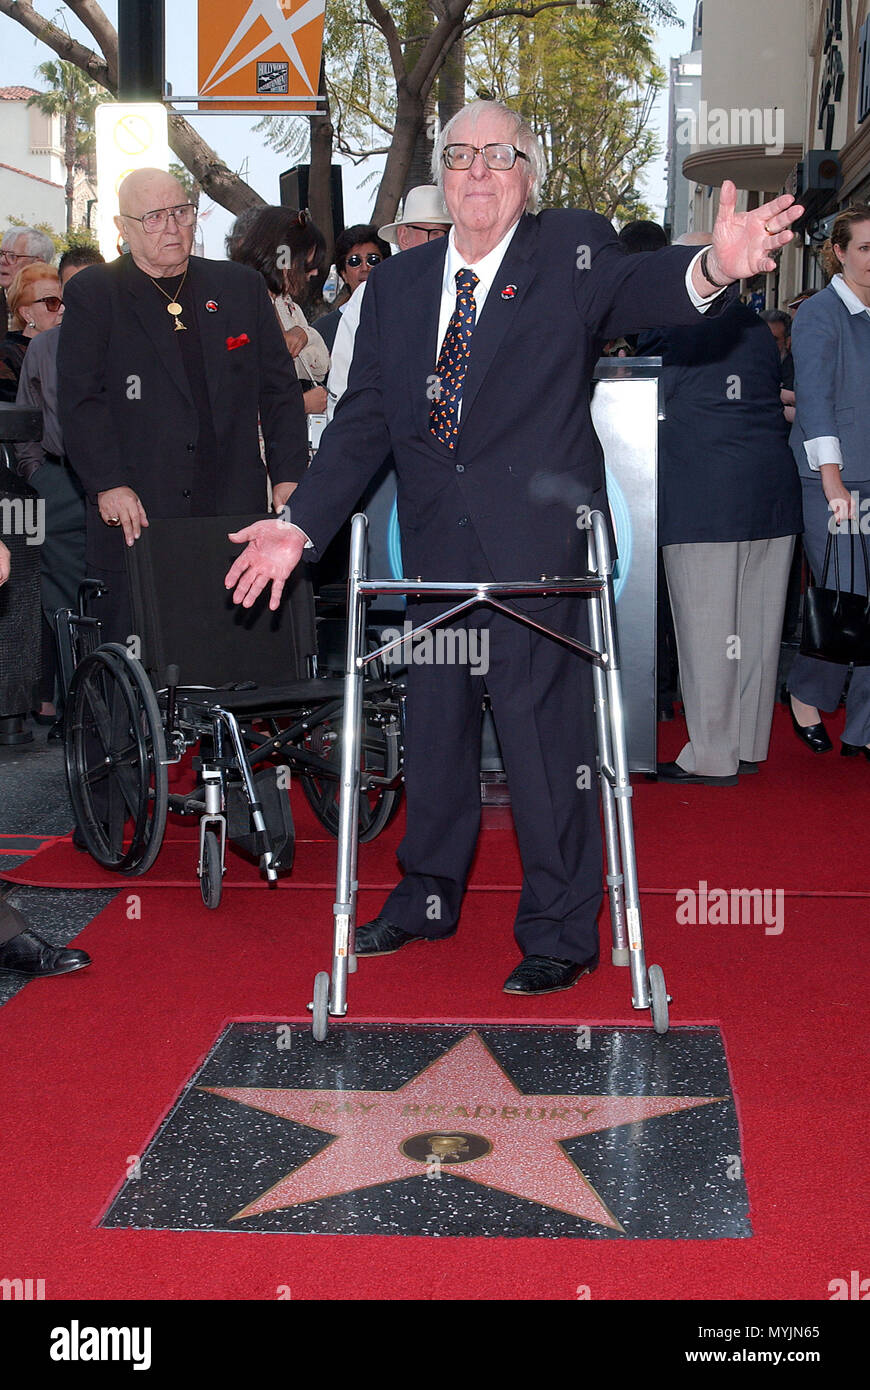 Ray Bradbury received a Star on the Hollywood walk of Fame in Los Angeles. April 1, 2002.           -            RayBradbury_starHollBlvd08.jpgRayBradbury_starHollBlvd08  Event in Hollywood Life - California, Red Carpet Event, USA, Film Industry, Celebrities, Photography, Bestof, Arts Culture and Entertainment, Topix Celebrities fashion, Best of, Hollywood Life, Event in Hollywood Life - California, movie celebrities, TV celebrities, Music celebrities, Topix, Bestof, Arts Culture and Entertainment, Photography,    inquiry tsuni@Gamma-USA.com , Credit Tsuni / USA, Honored with a Star on the Hol Stock Photo